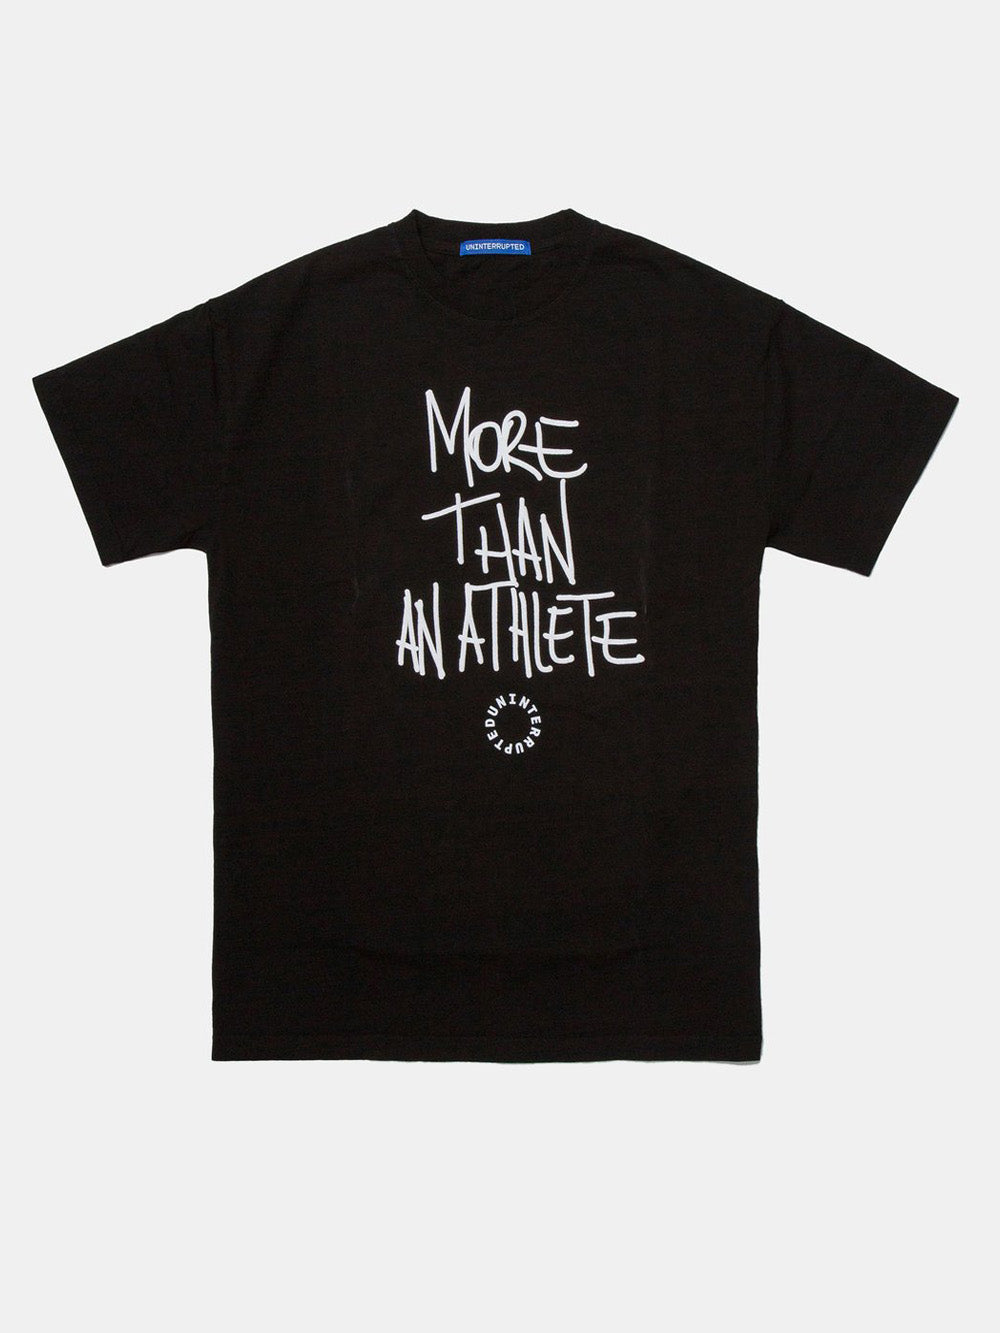 More Than An Athlete Venice Tee Black - front of tshirt